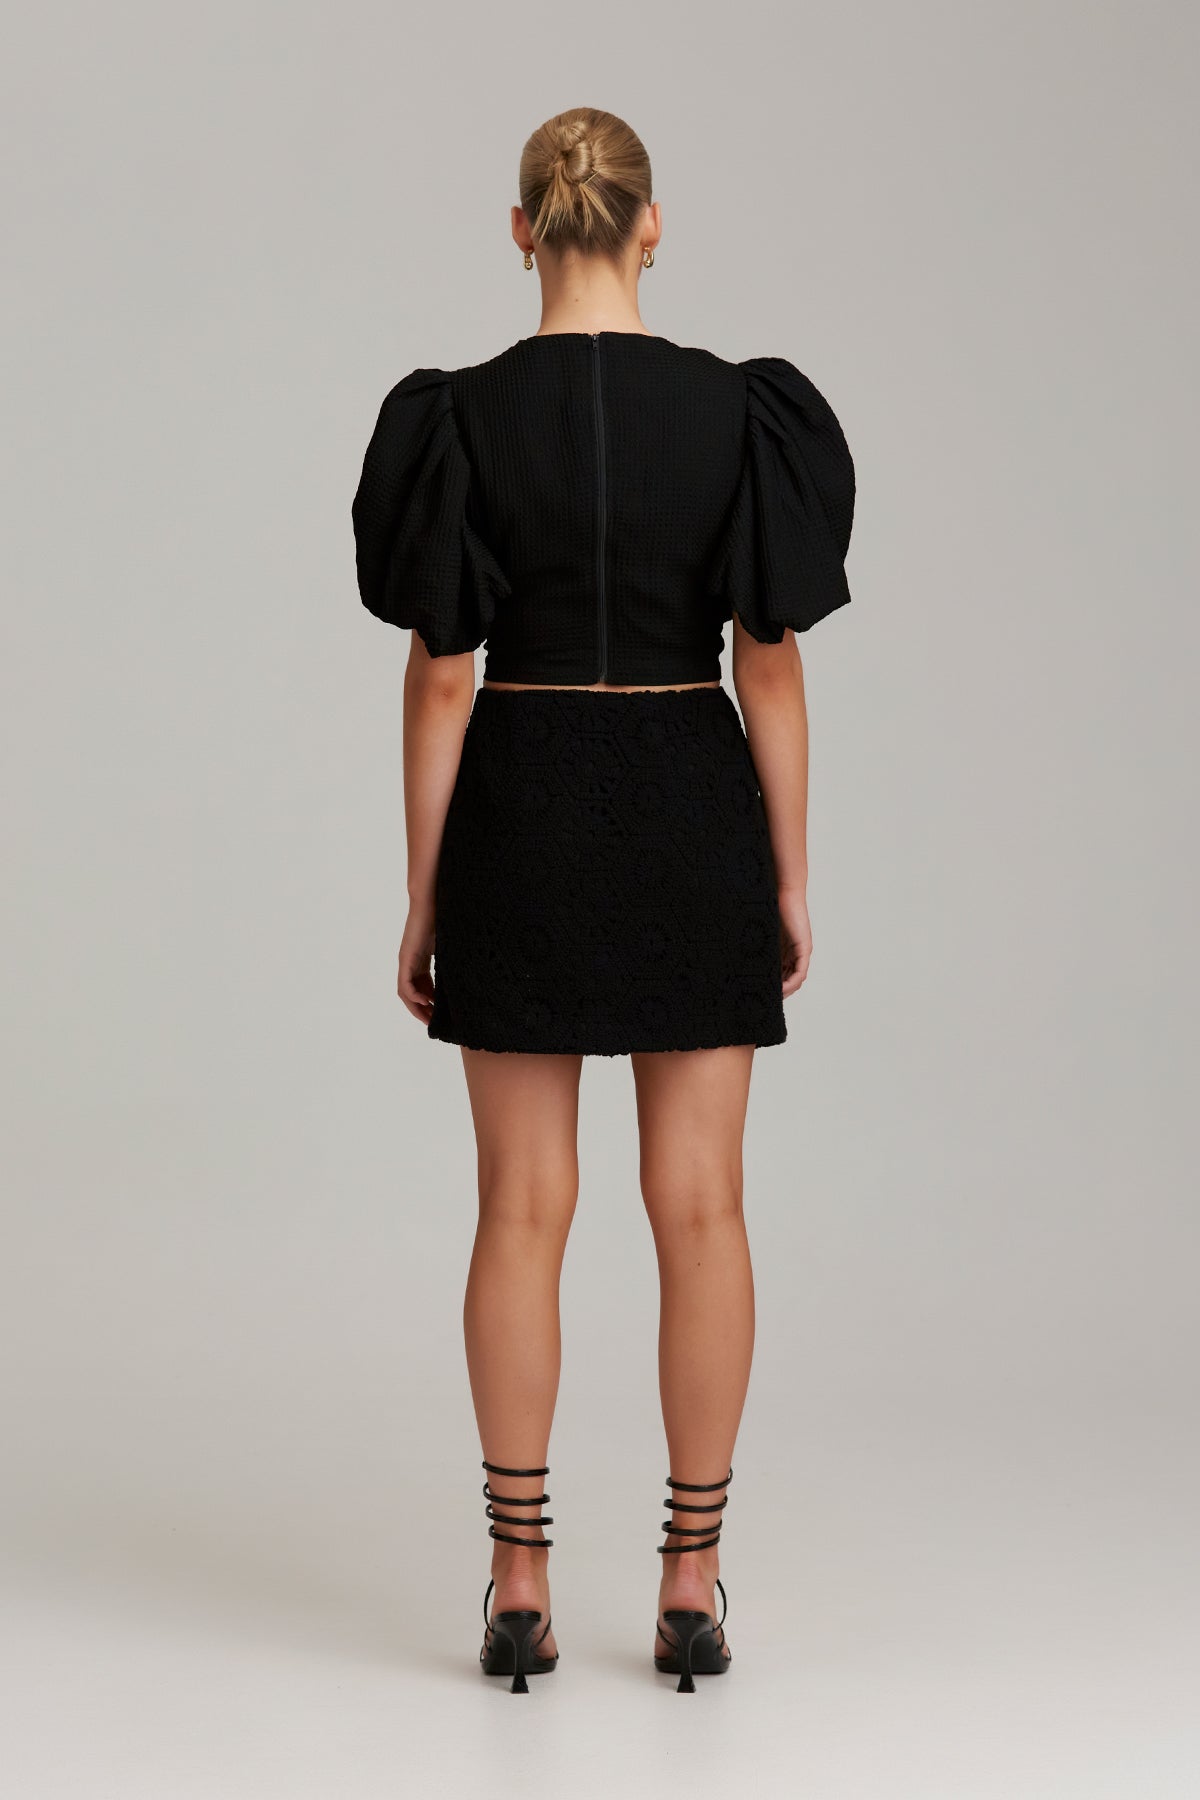 C/MEO Collective - Nuance Skirt - Black